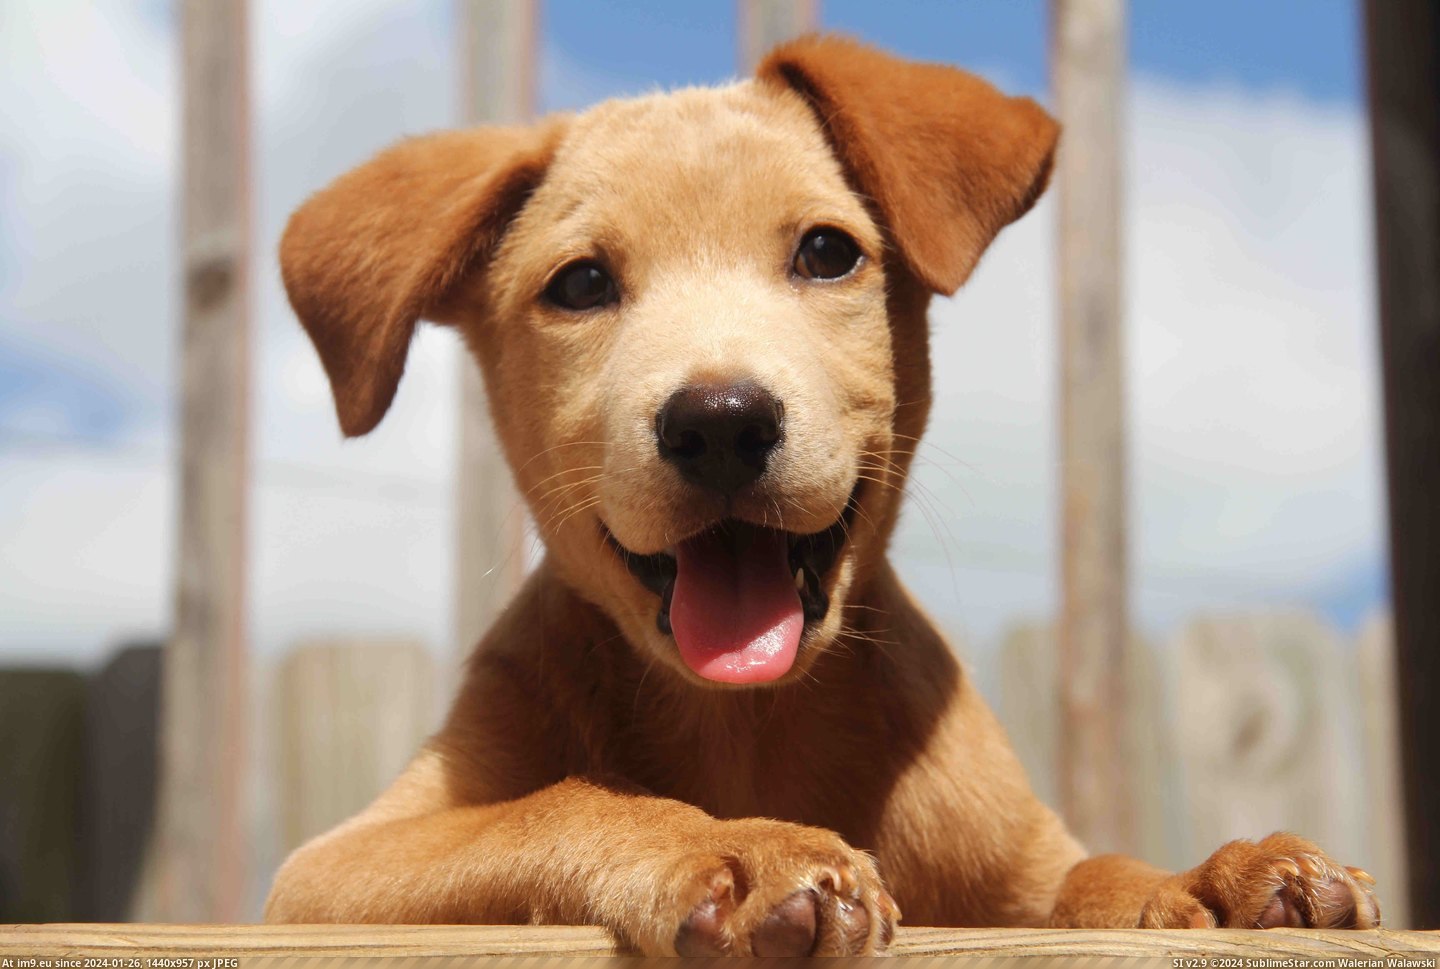 #Cute #Wallpaper #Happy #Dog #Pup #Extremely #Photogenic #Sweet #Smile #Puppy #Highres [Aww] Extremely photogenic puppy:) Pic. (Bild von album My r/AWW favs))